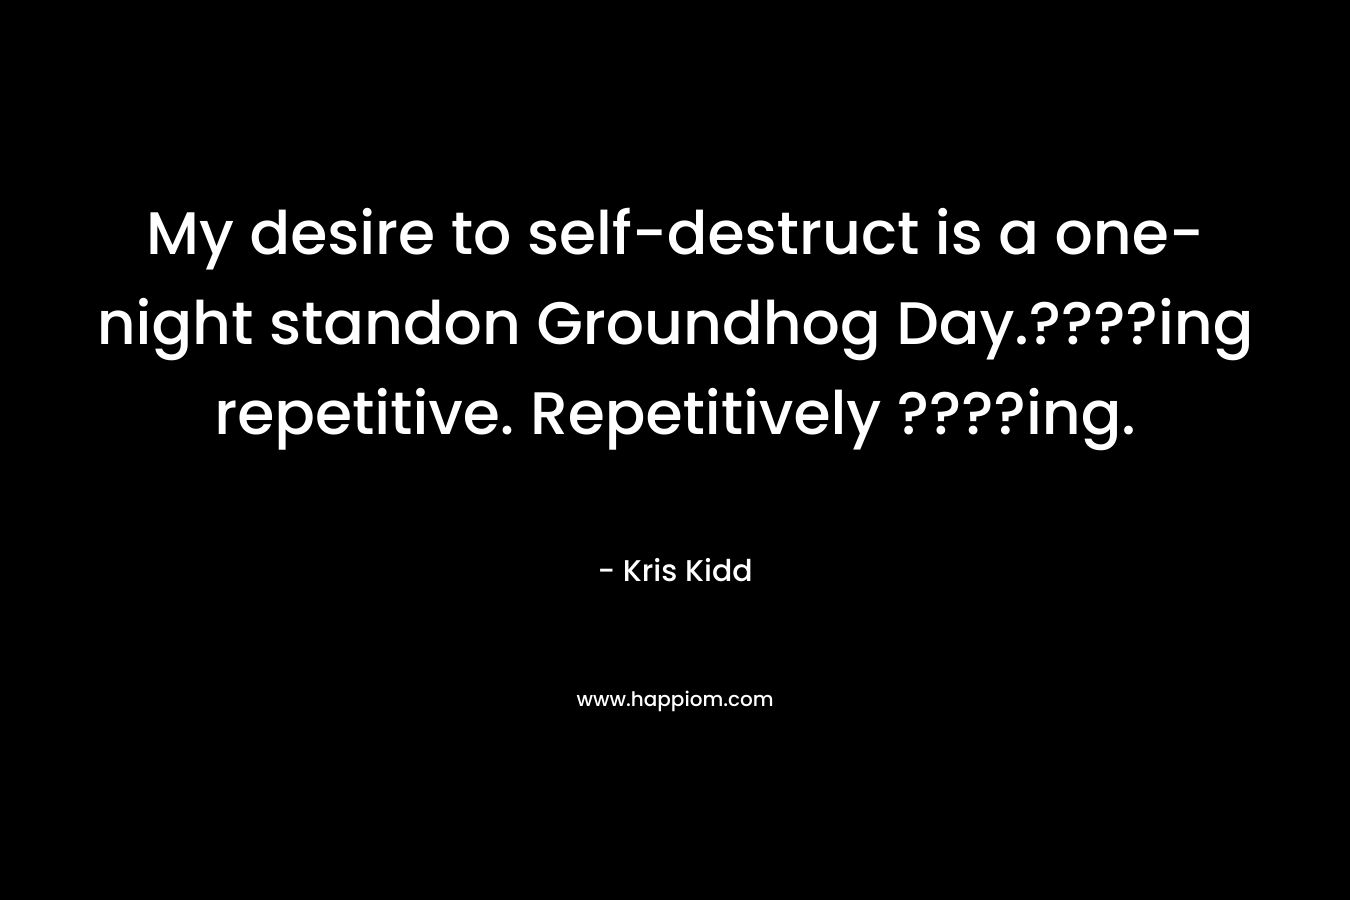 My desire to self-destruct is a one-night standon Groundhog Day.????ing repetitive. Repetitively ????ing.